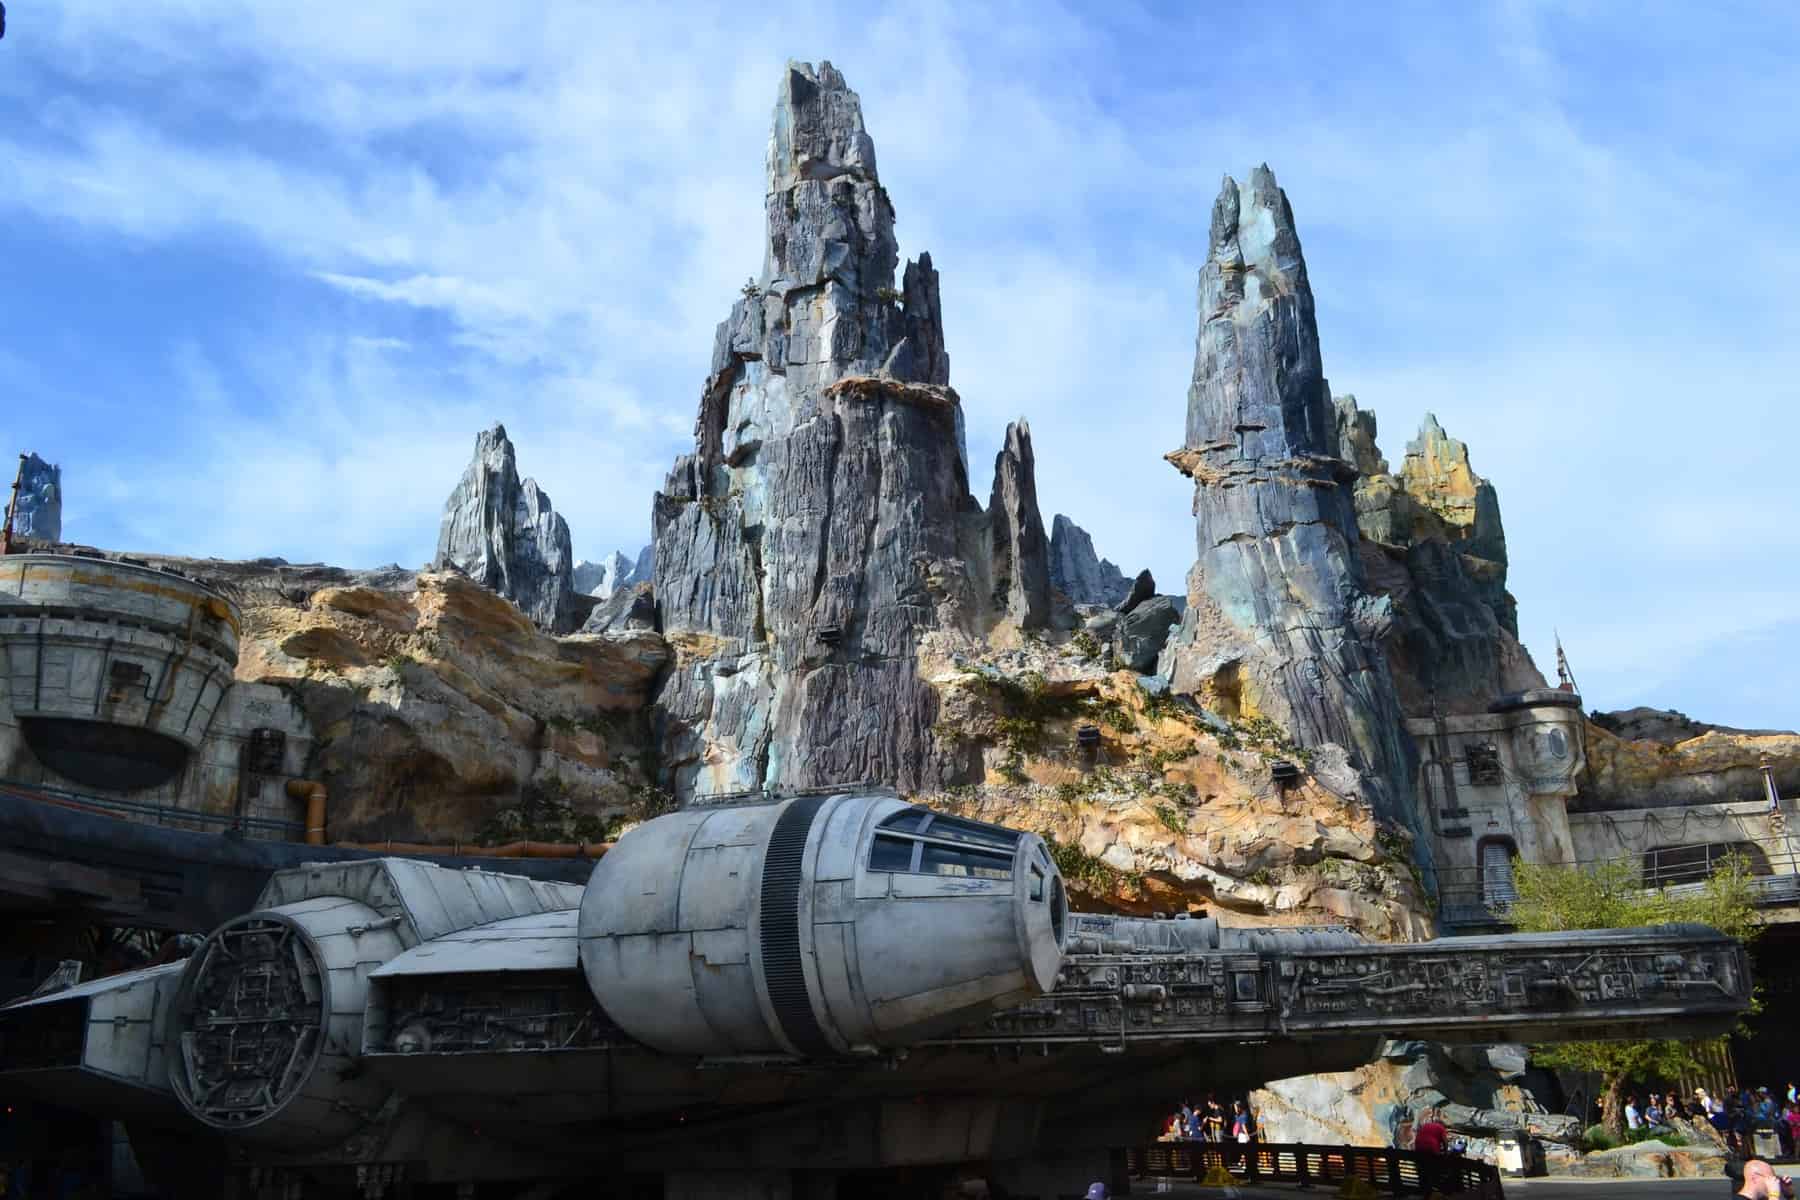 Millennium Falcon: Smugglers Run (what to know about the Star Wars ride)